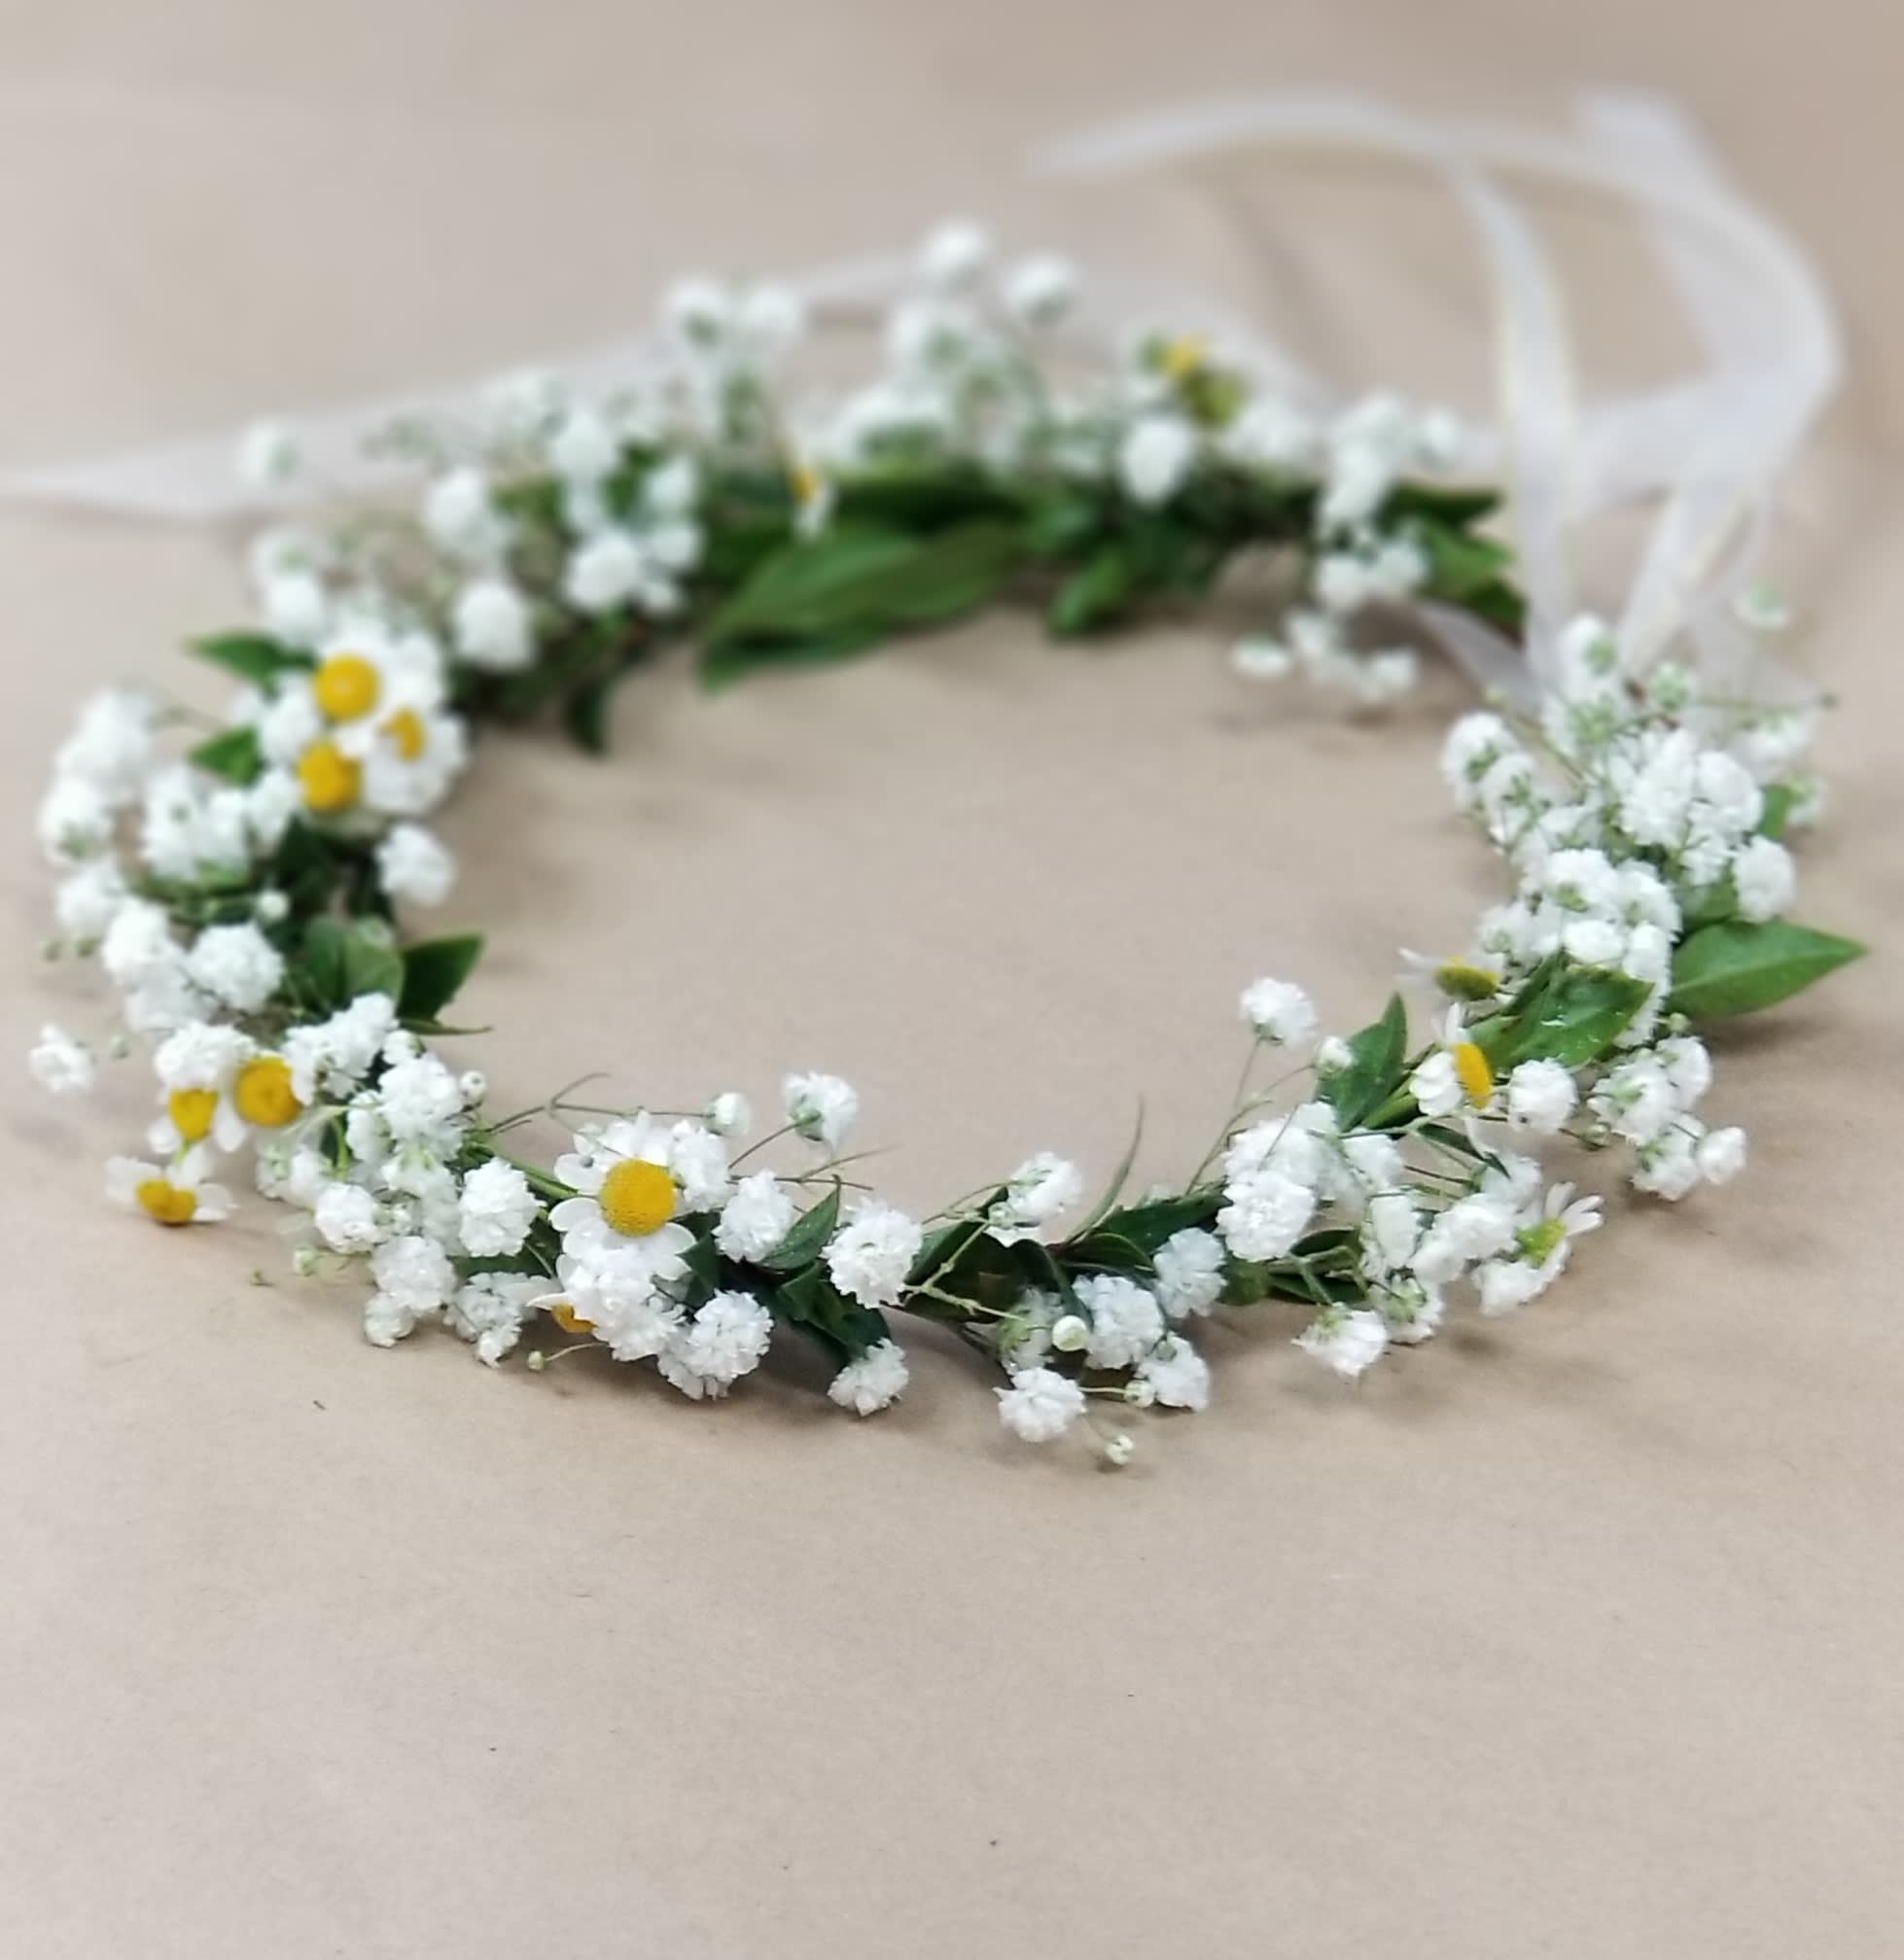 where to buy flowers for flower crowns